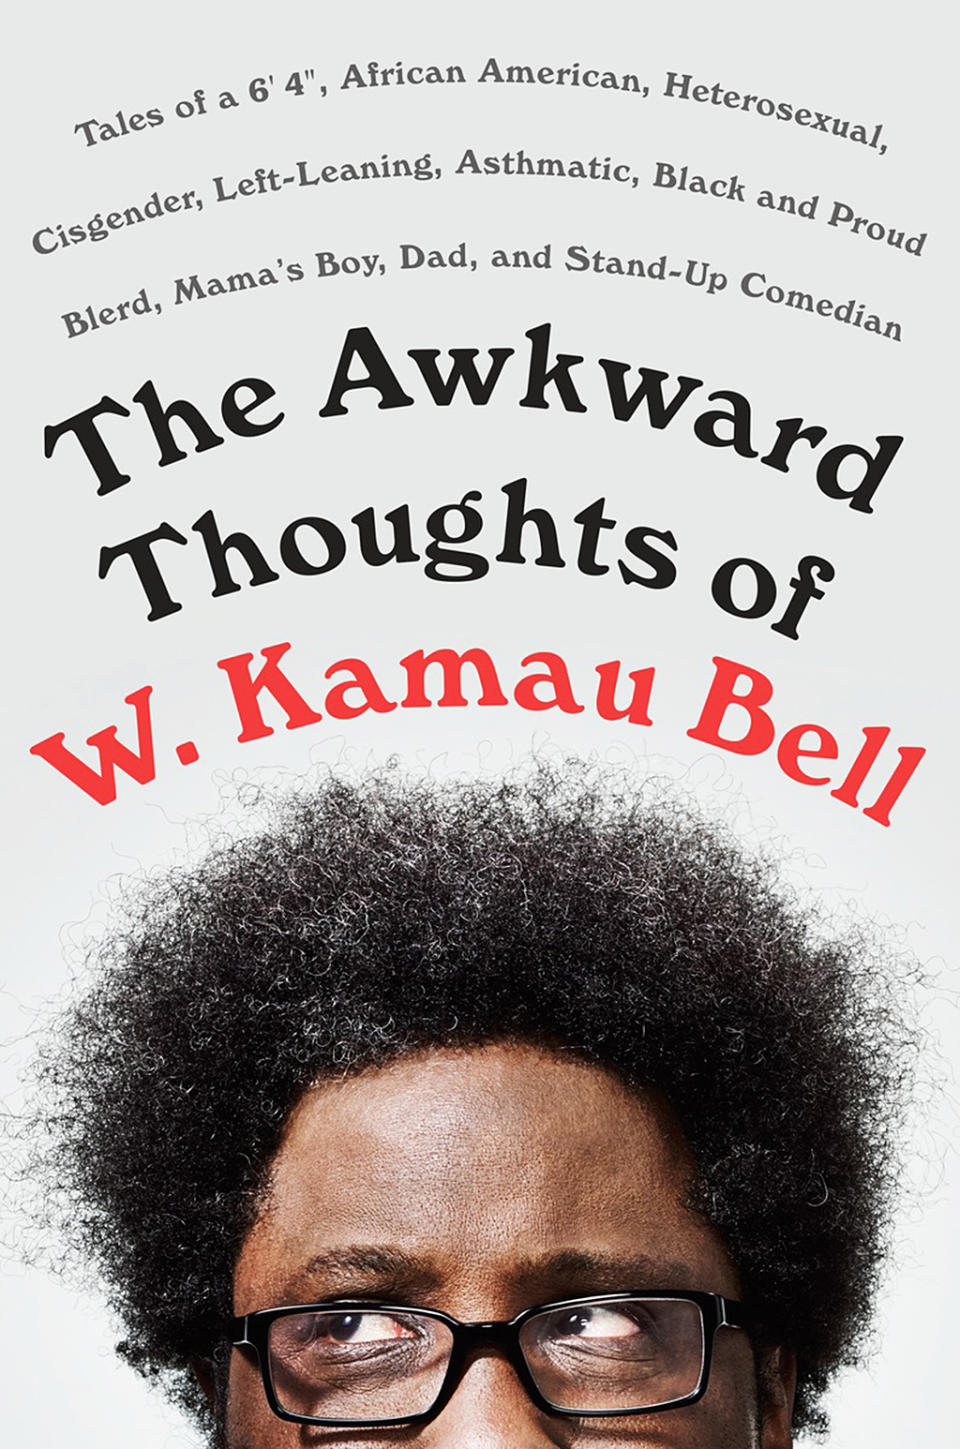 <p>The host of FXX’s <em>Totally Biased With W. Kamau Bell</em> and the Emmy-nominated CNN series <em>United Shades of America</em>, standup comedian Bell takes his unique political and social humor to book form with essays on everything from 9/11 and sports to his self-proclaimed awkward attitudes about white women and white guys. Plenty of his observational humor is aimed at himself, as he talks about being a black nerd, being a very tall black male, and, in one of the standout chapters, “My Most Awkward Birthday Ever.”<br><br>(Penguin) </p>